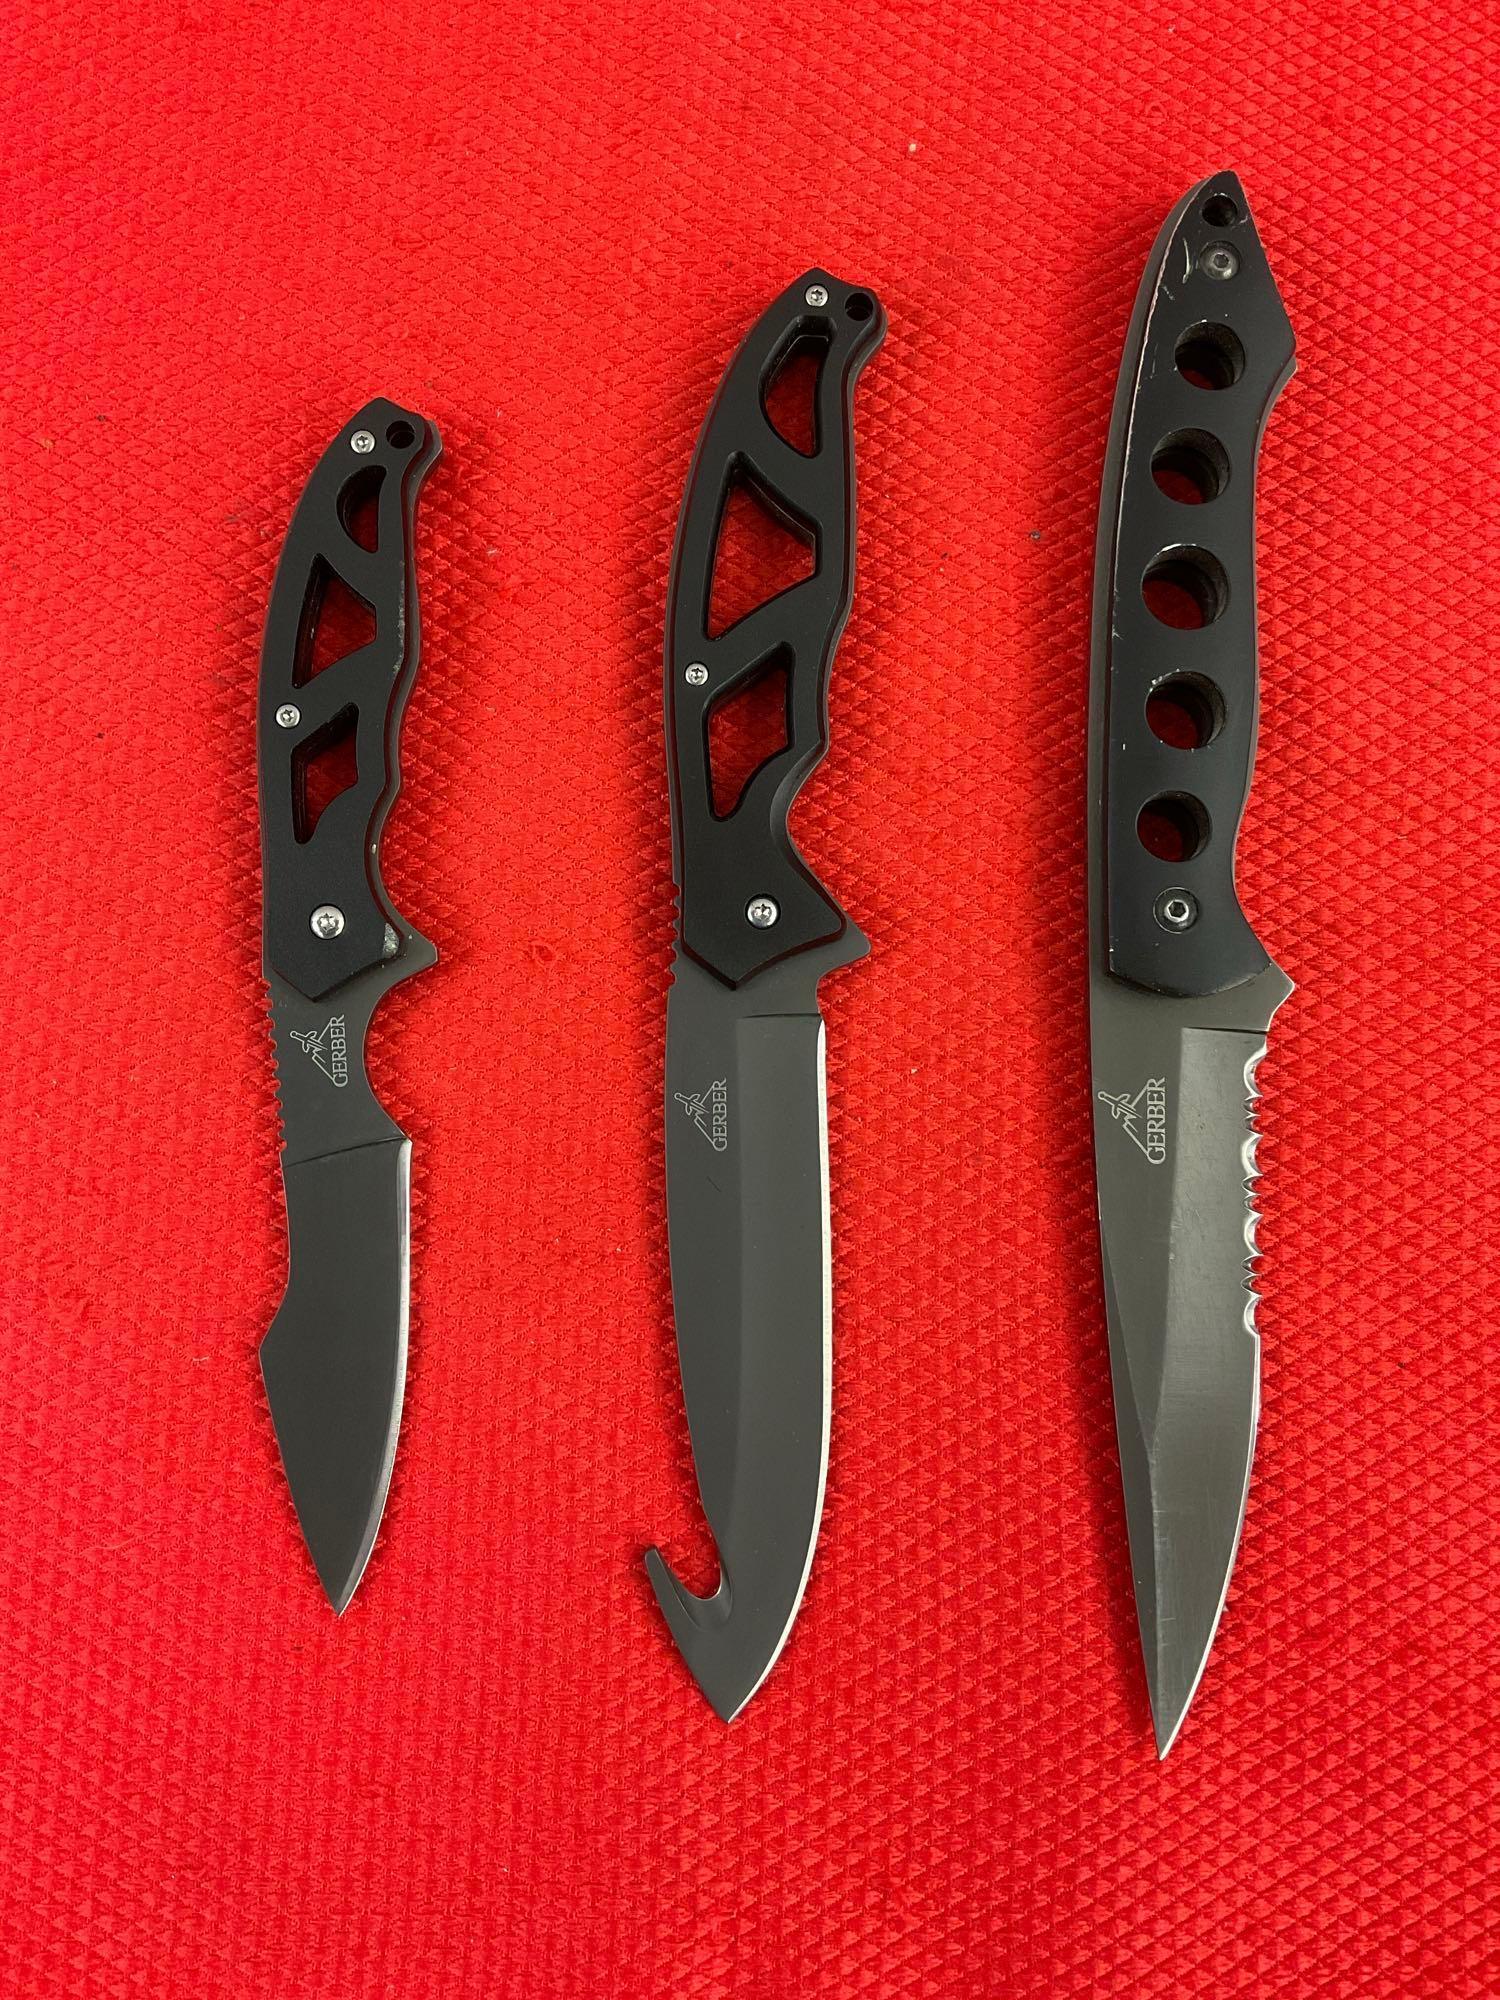 3 pcs Vintage Gerber 440 Steel Fixed Blade Hunting Knives w/ Sheathes. No Model Numbers. See pics.